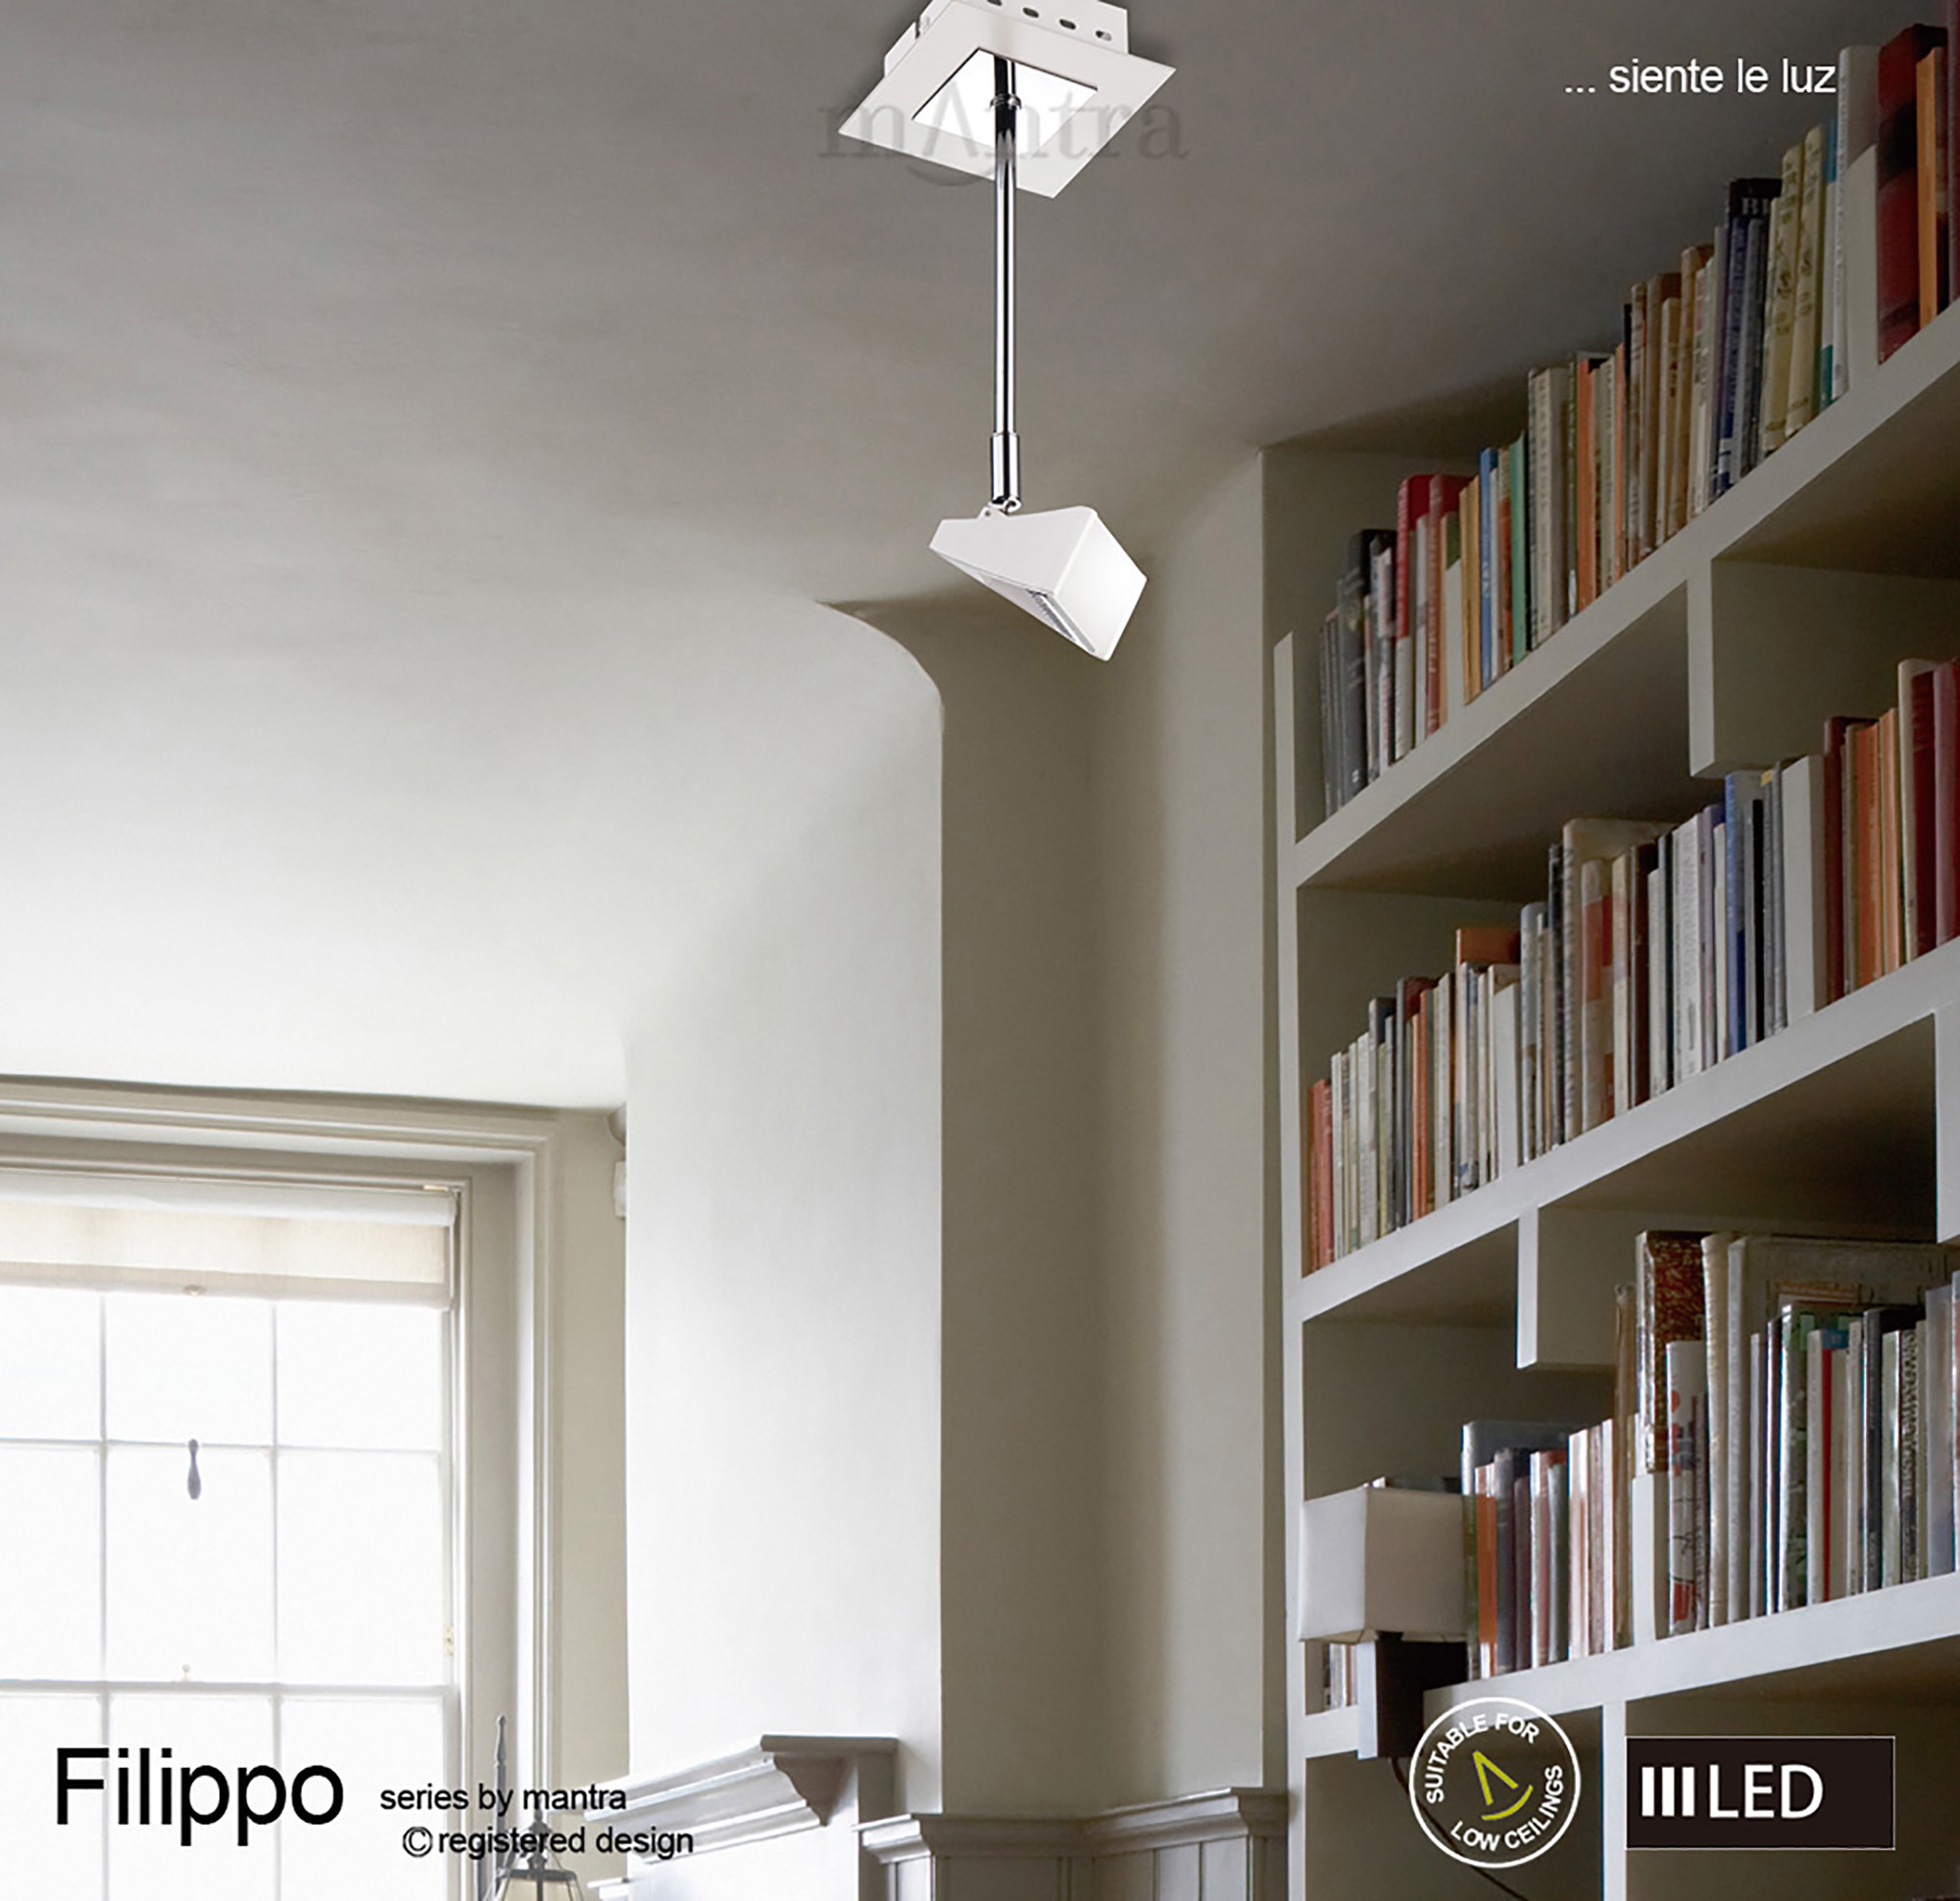 Filippo Ceiling Lights Mantra Fusion Surface Spot Lights